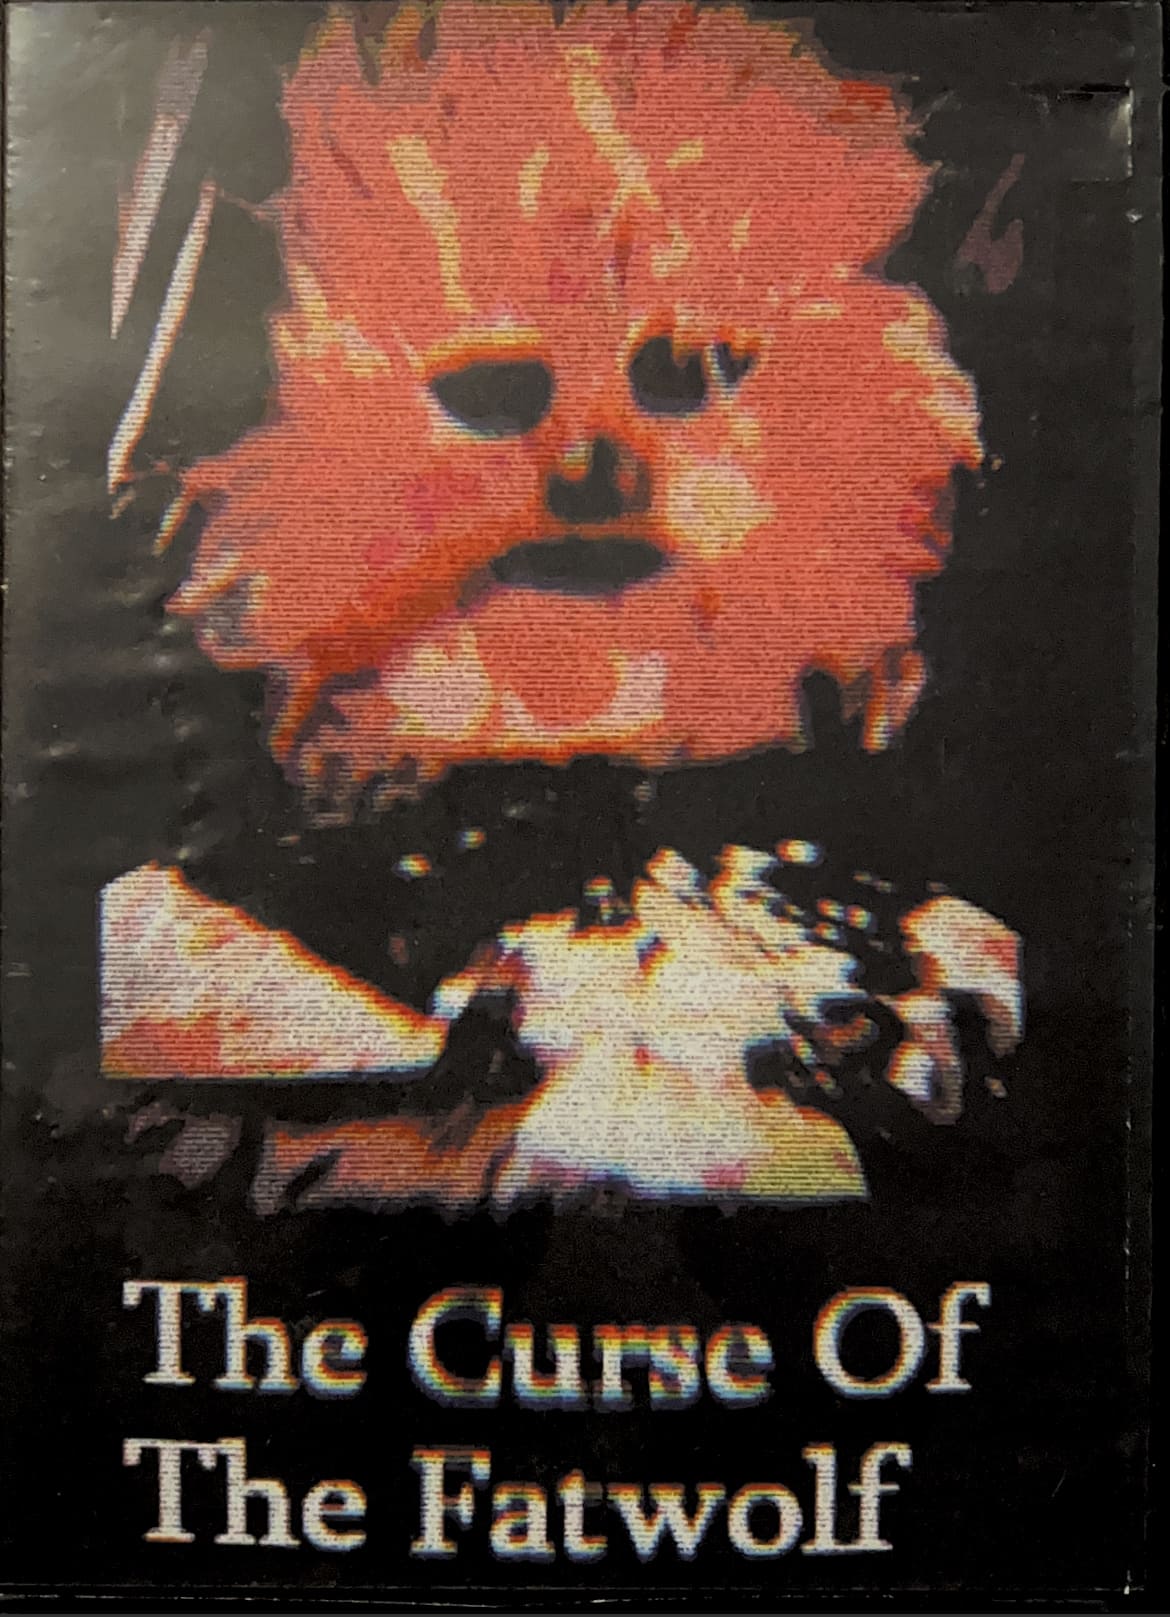 The Curse Of The Fatwolf